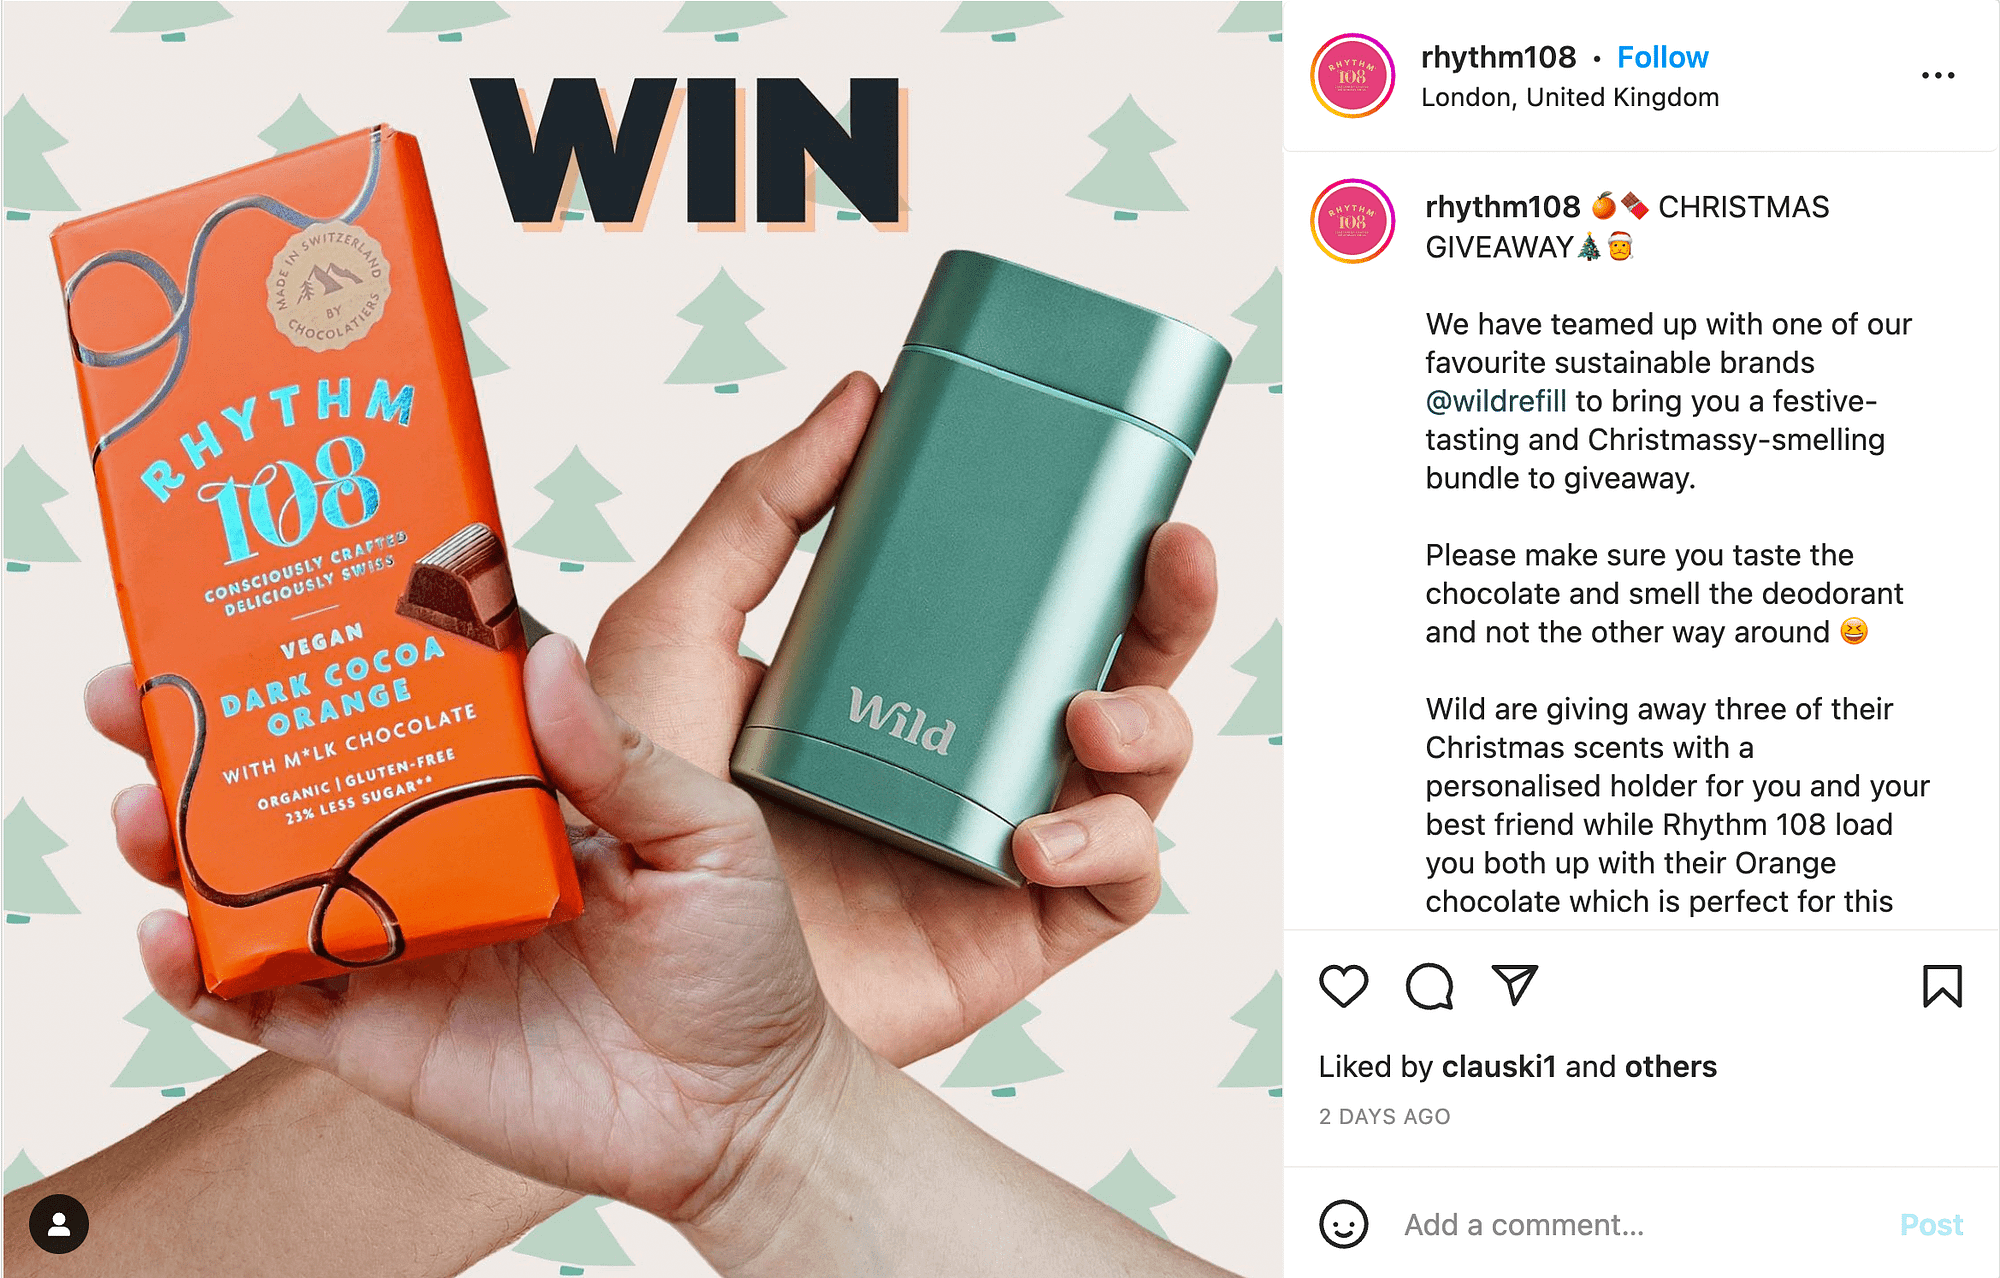 A Christmas giveaway on Instagram - always good among your Christmas promotion ideas.